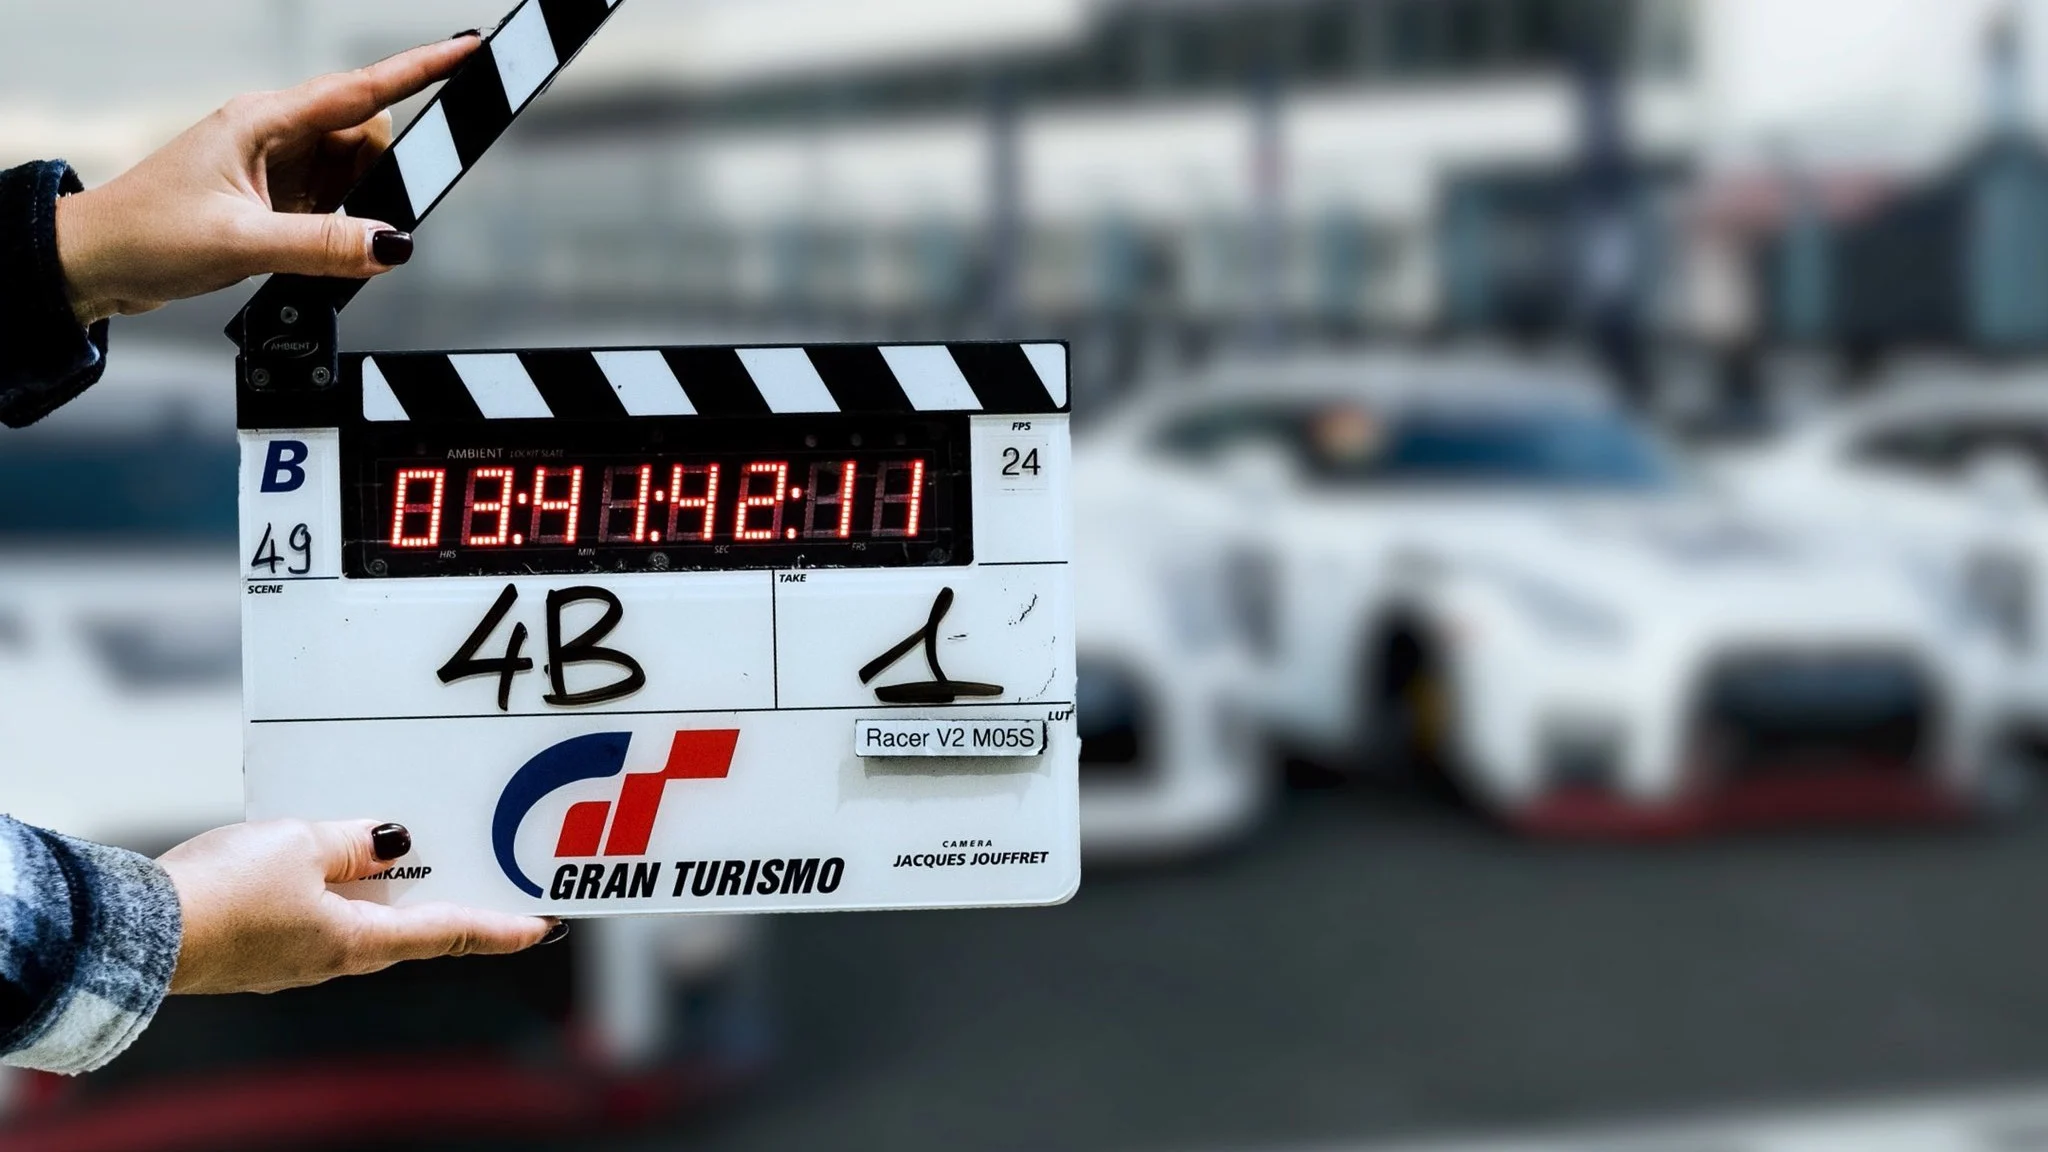 Gran Turismo the Movie Shooting Has Finally Ended